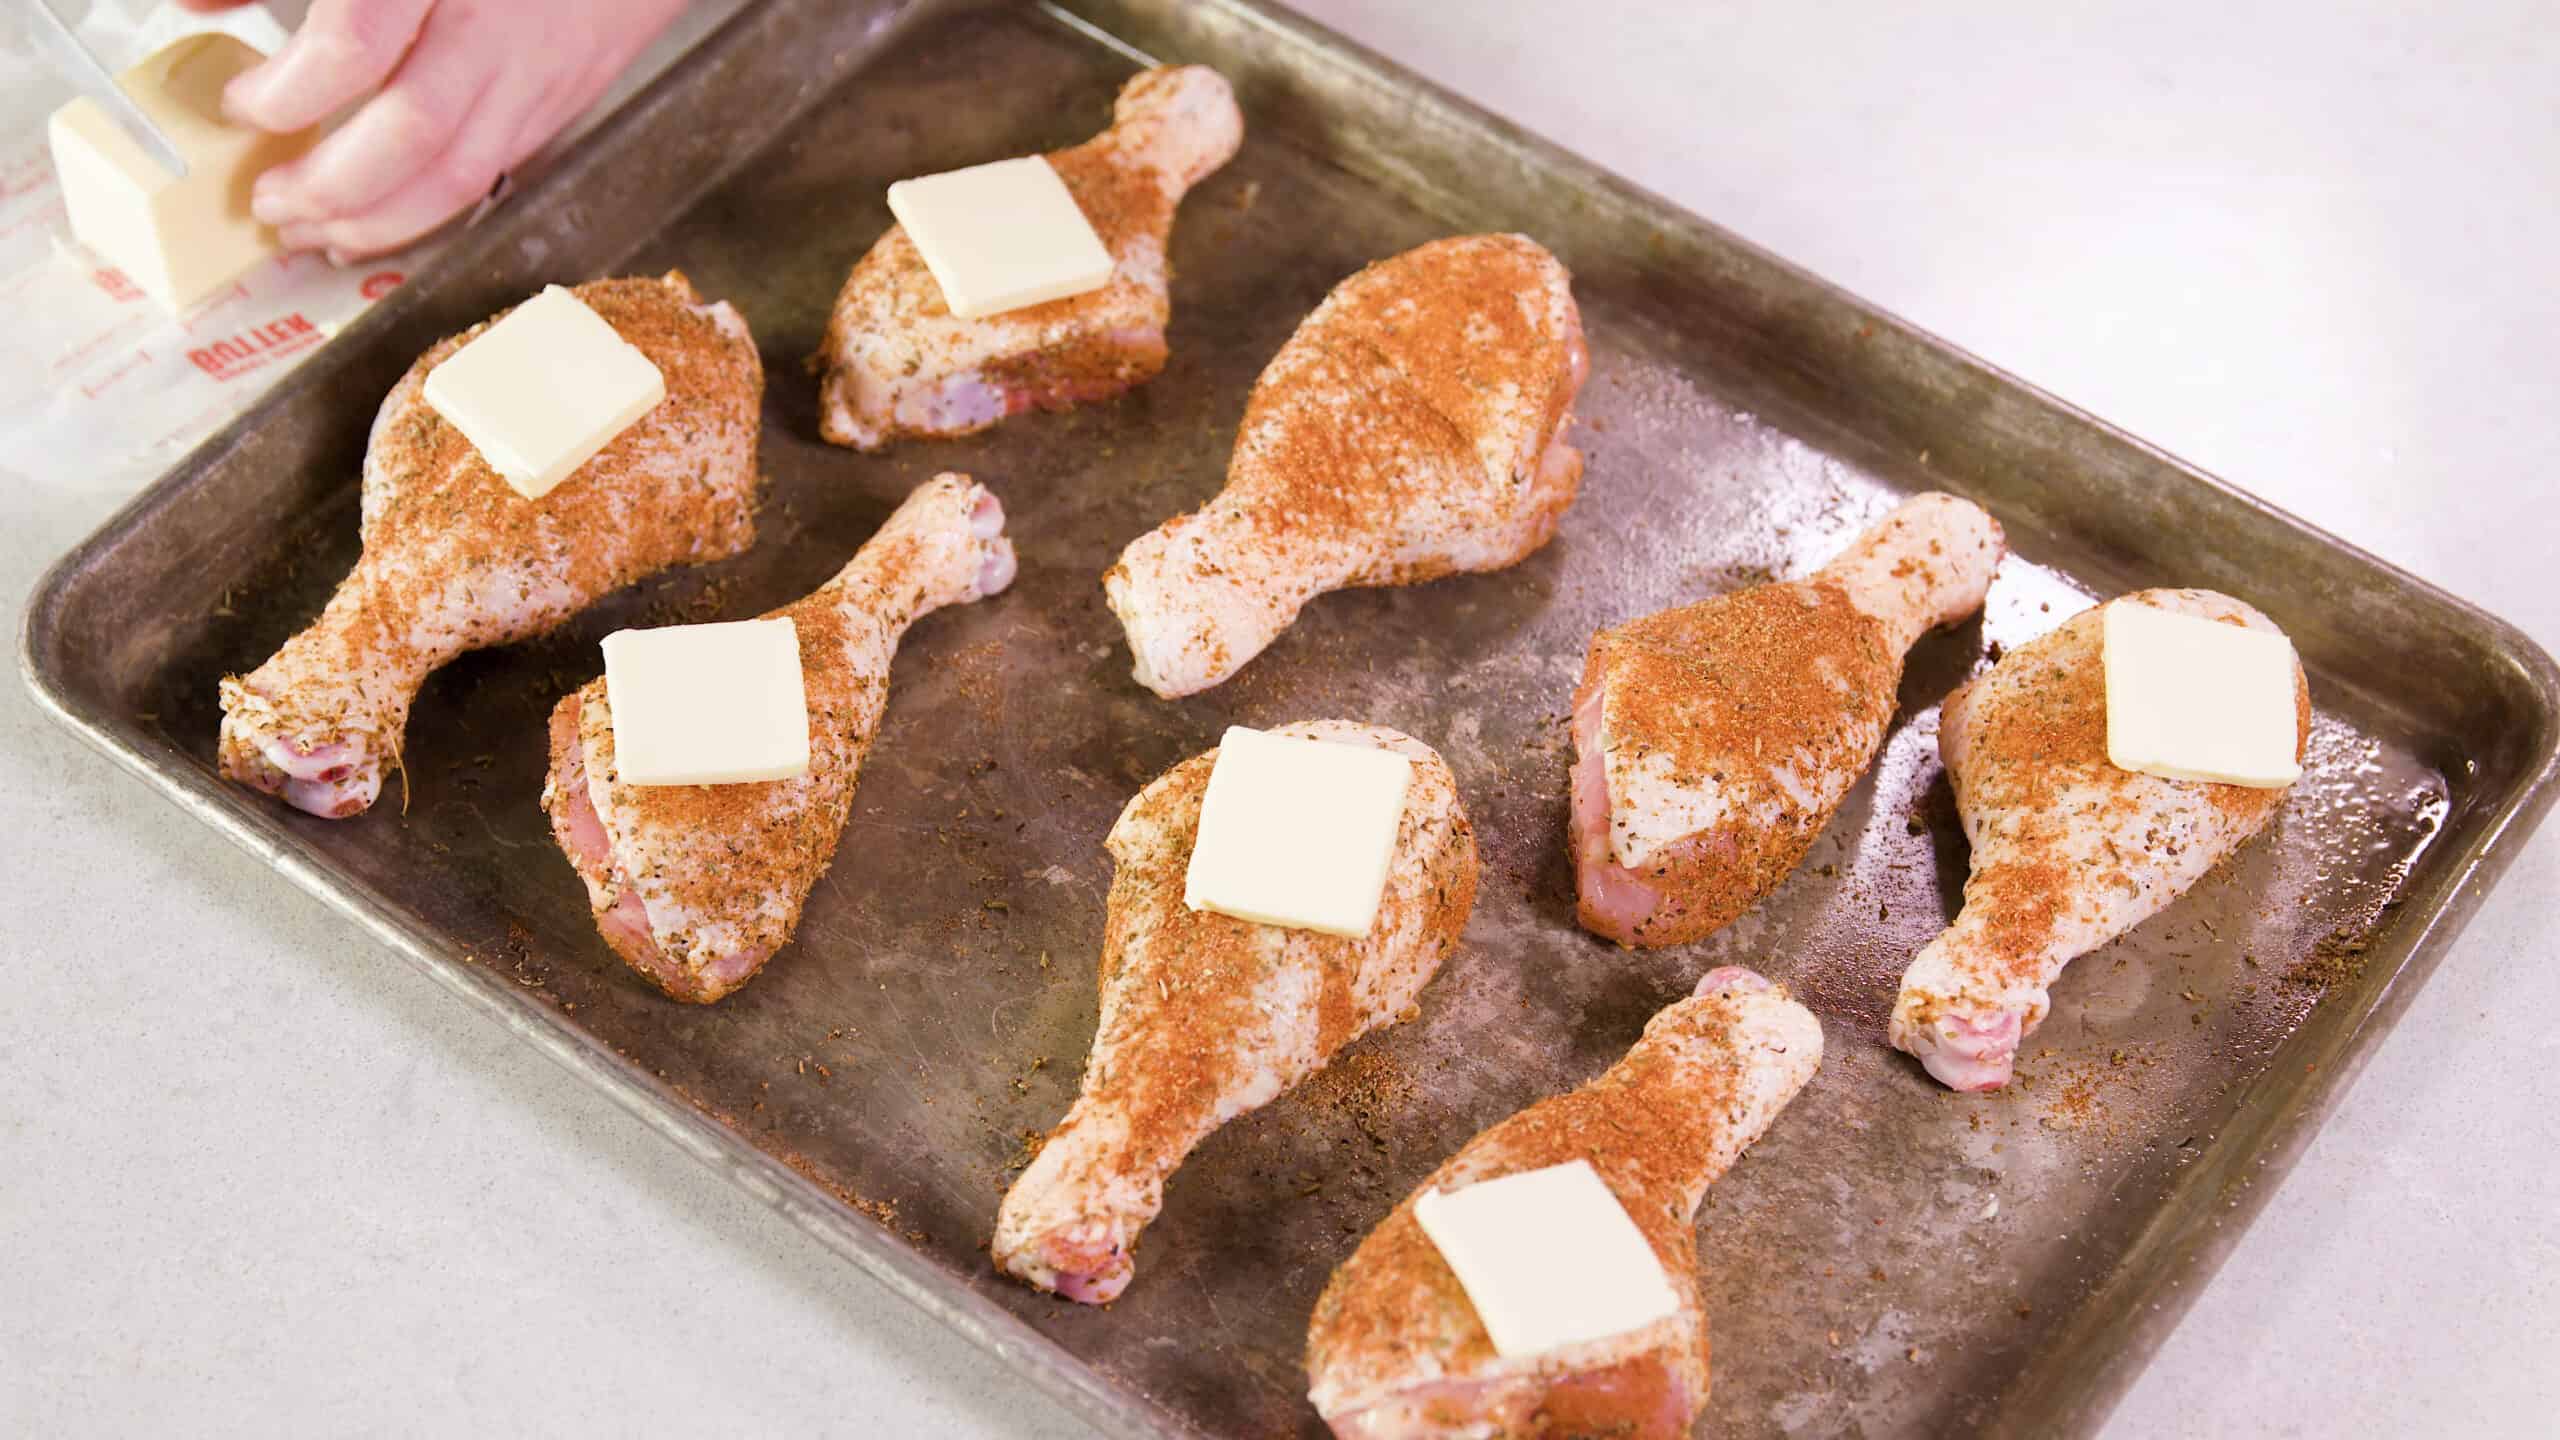 Angled view of greased metal baking sheet filled with eight raw chicken drumsticks coated with dry cajun spices and each drumstick topped with a pad of butter.